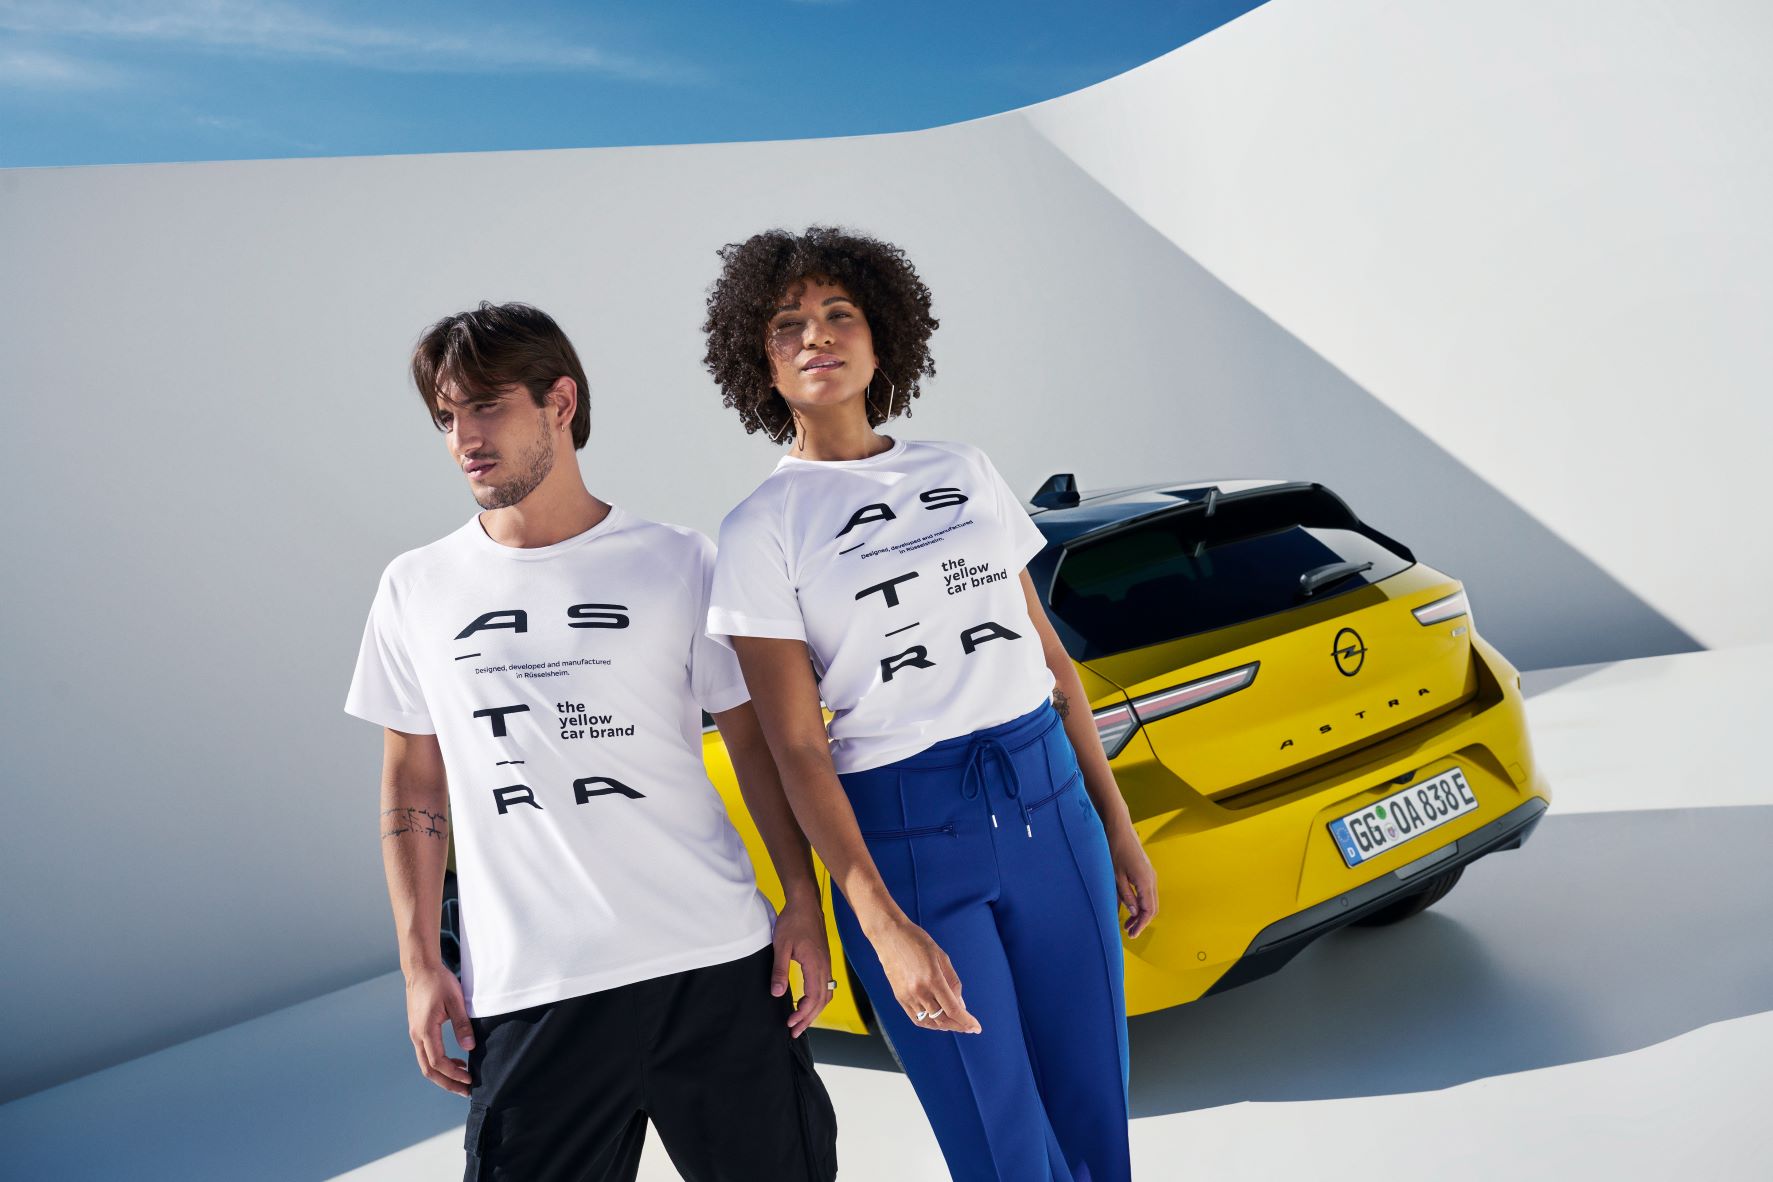 Two models wearing white Opel Astra t-shirts pictures in front of a Kult Yellow Opel Astra hatchback.